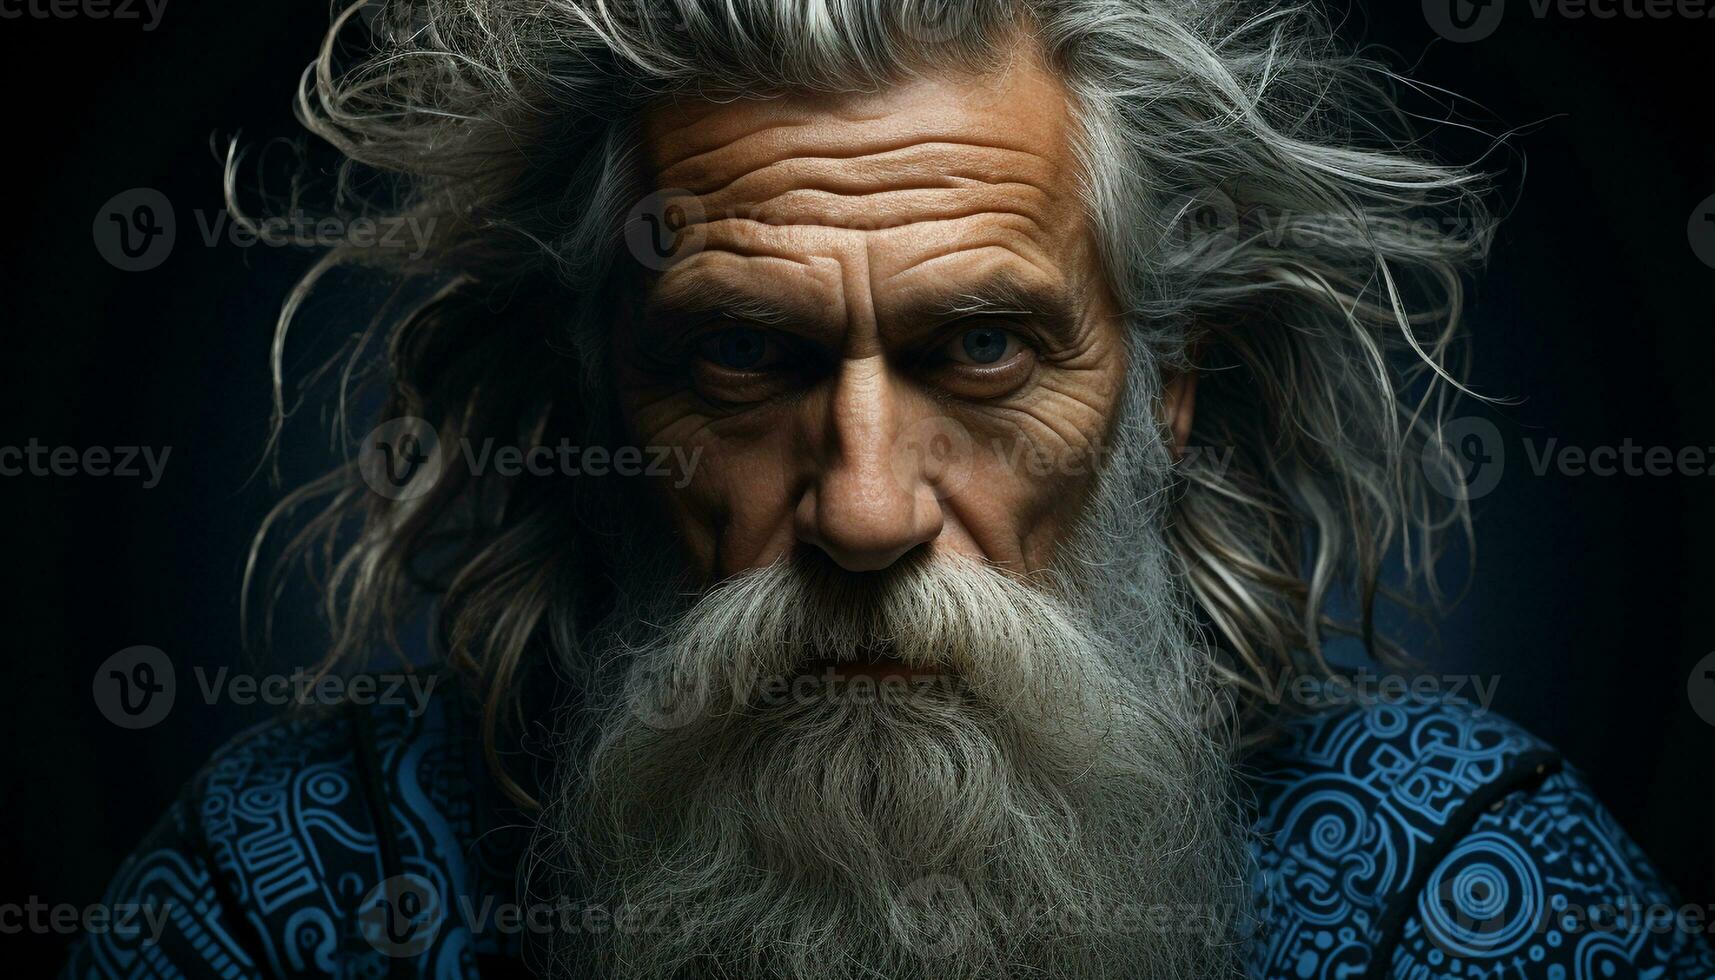 A confident, serious man with gray hair and a beard generated by AI photo